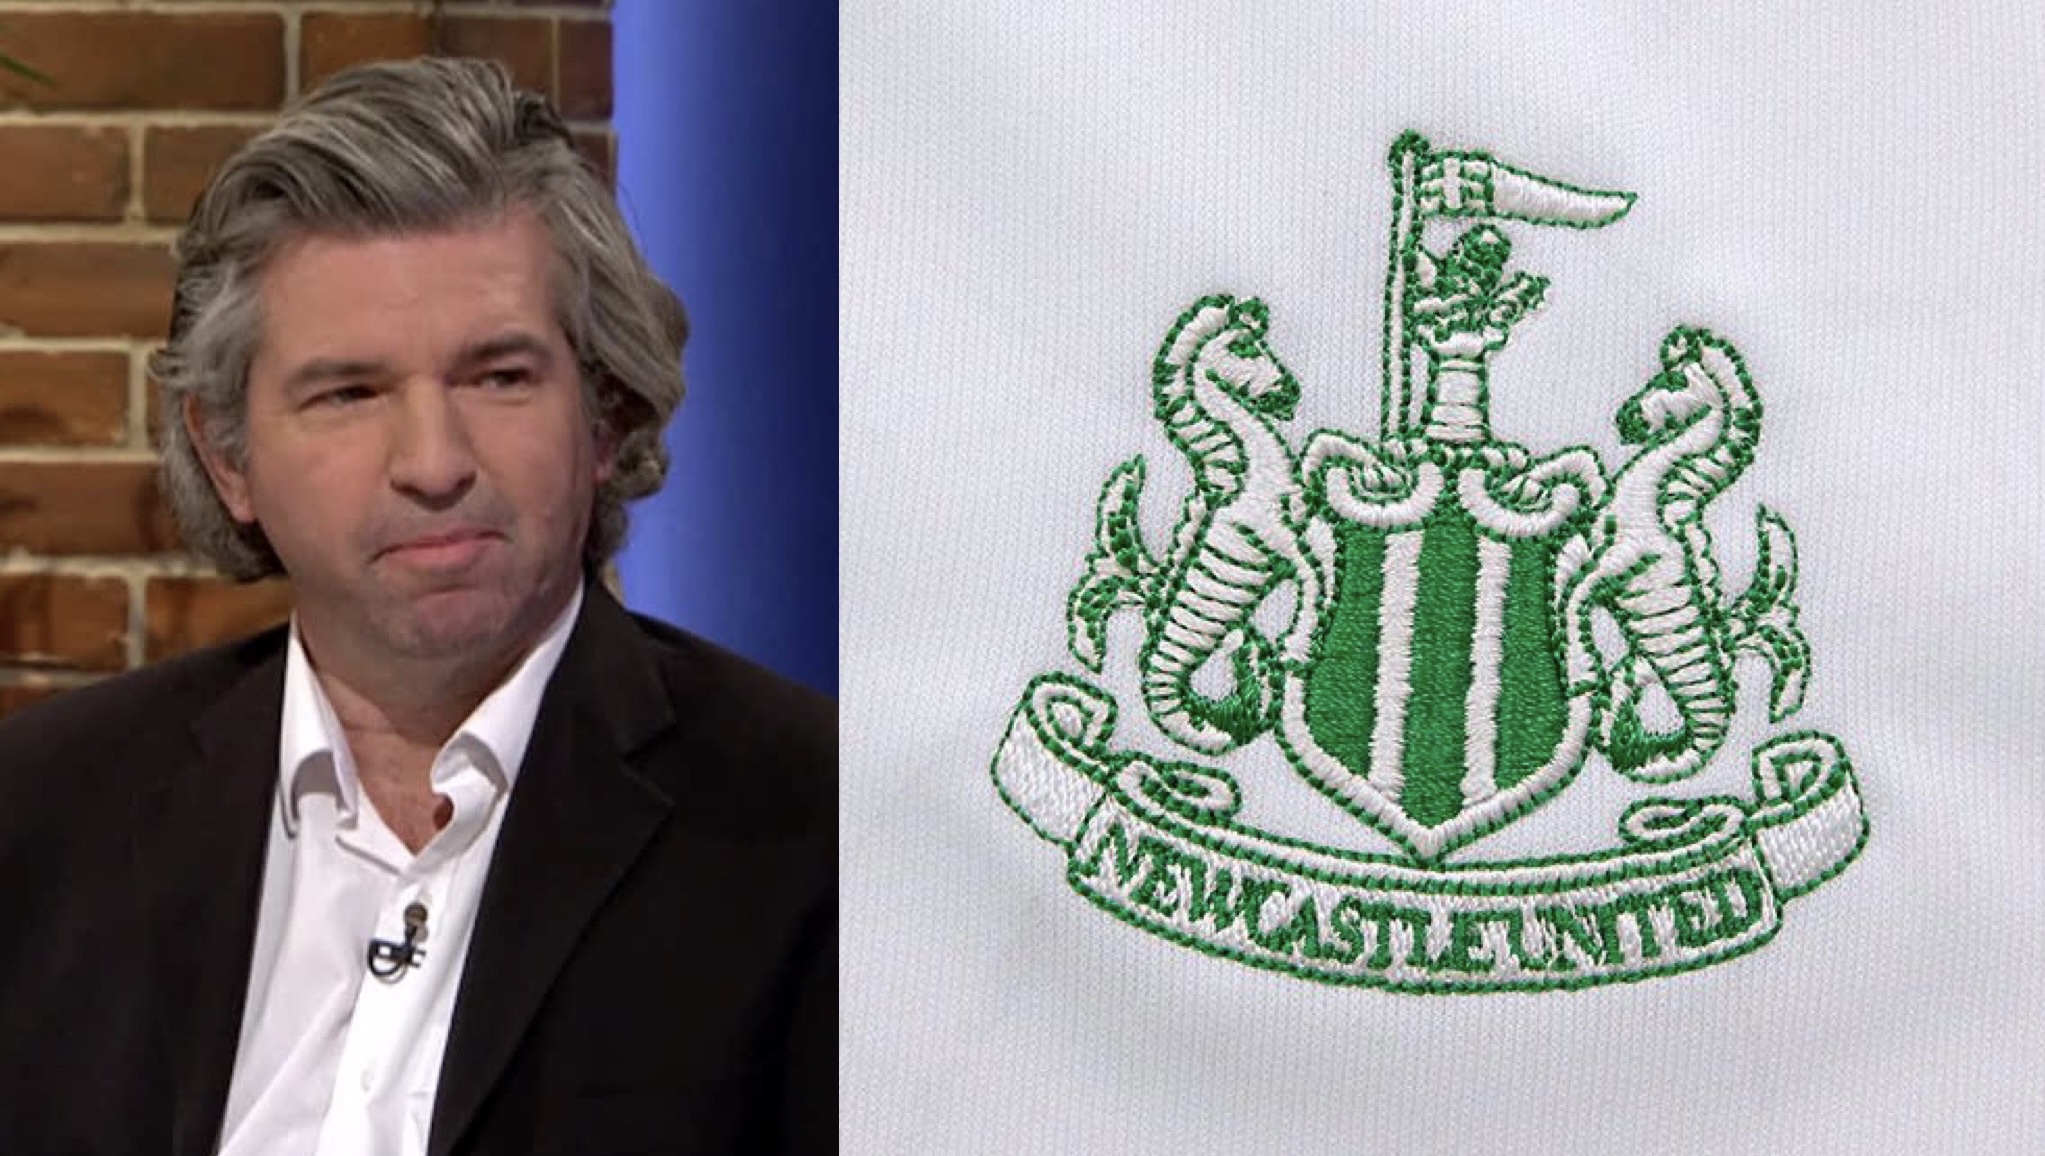 Journalist in Qatar makes another Saudi ‘joke’ at Newcastle’s expense – It’s getting silly now…